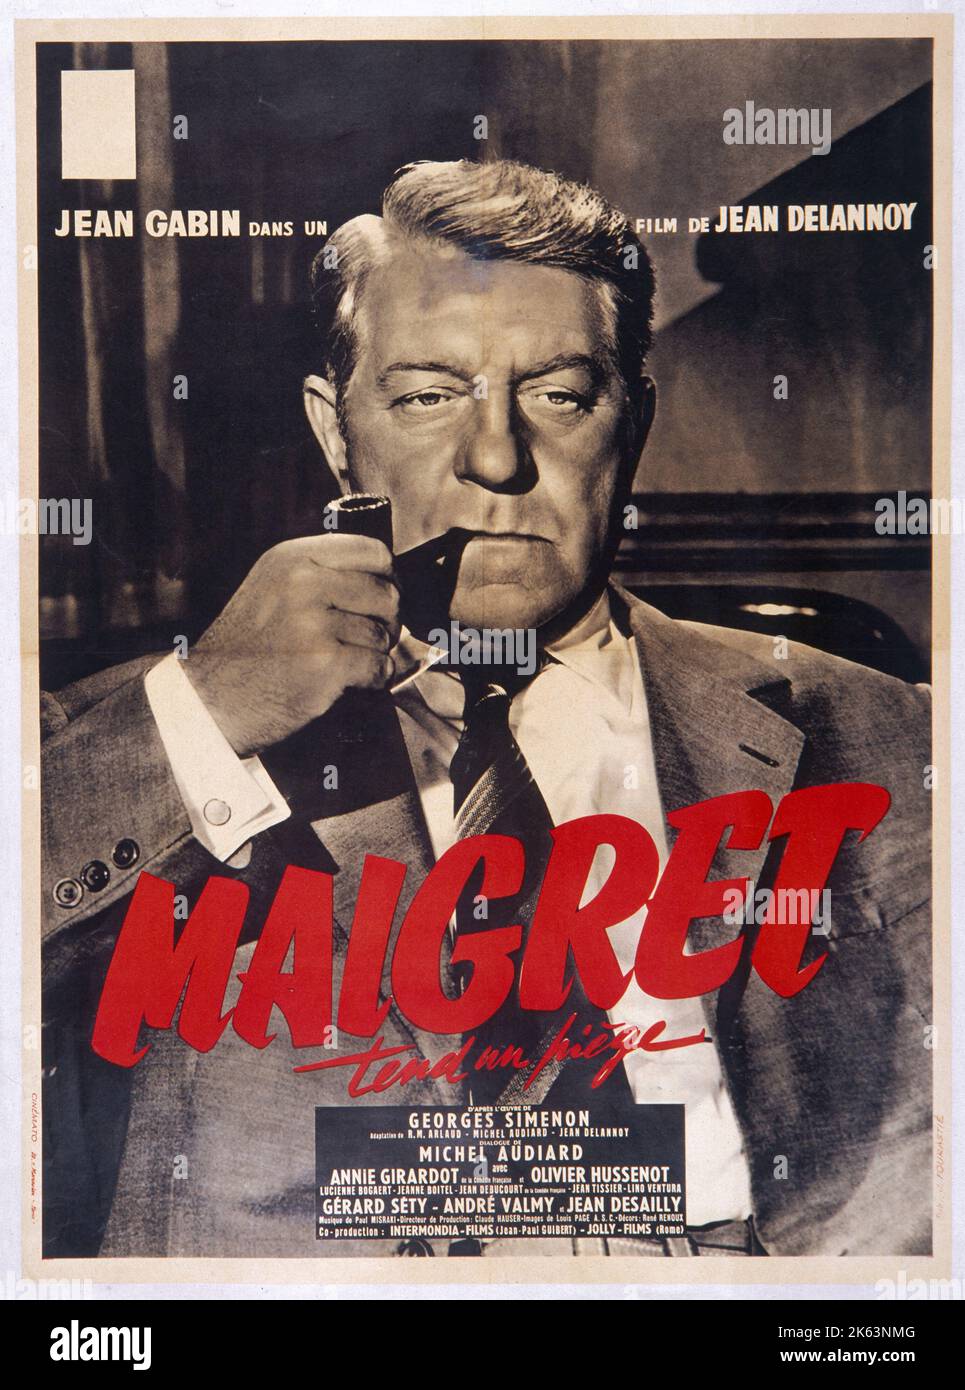 JEAN GABIN (1904 - 1976), French actor as Maigret on a poster advertising the Jean Delannoy film. Stock Photo